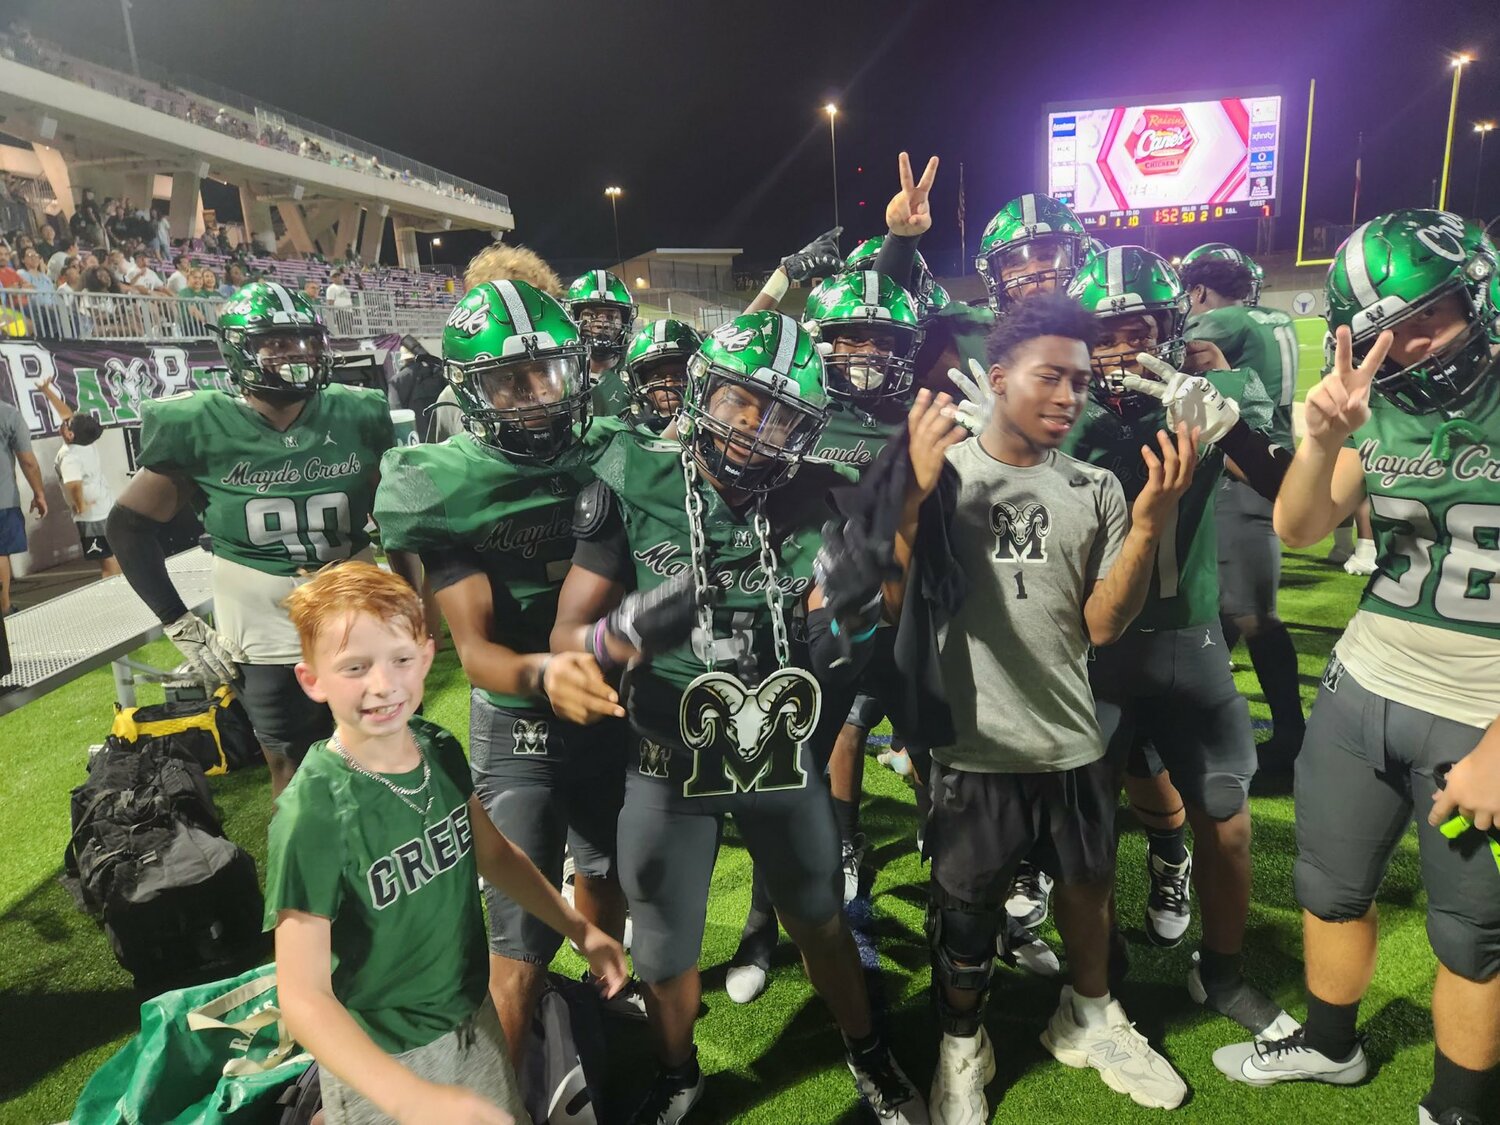 Mayde Creek beat Paetow 28-7 on Saturday to earn their first district win under head coach J. Jensen.